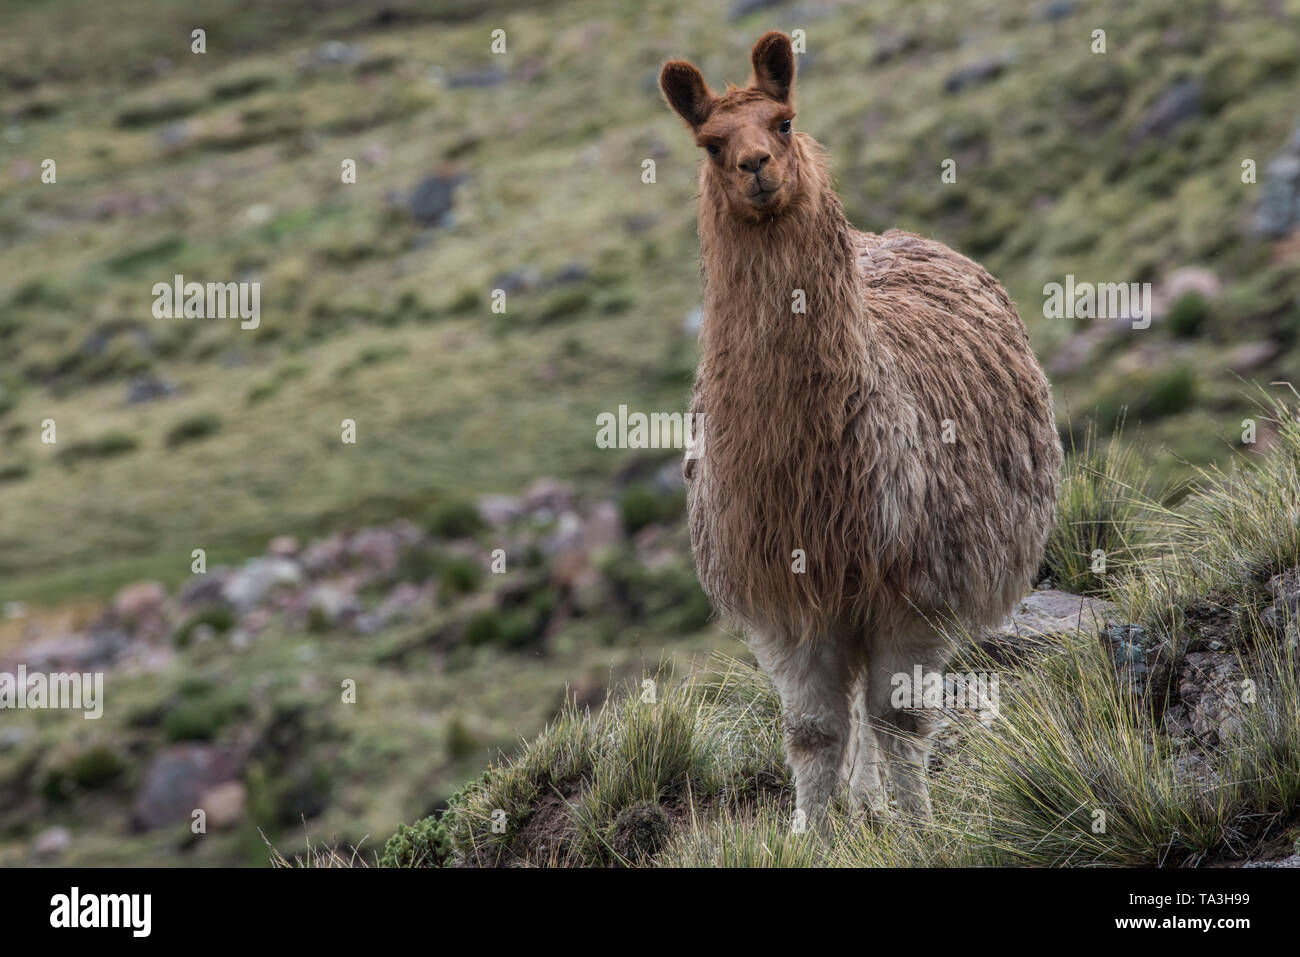 A domestic llama (Lama glama) from the puno of the high Andes in Southern Peru.  Their fur will be used to knit sweaters and hats. Stock Photo